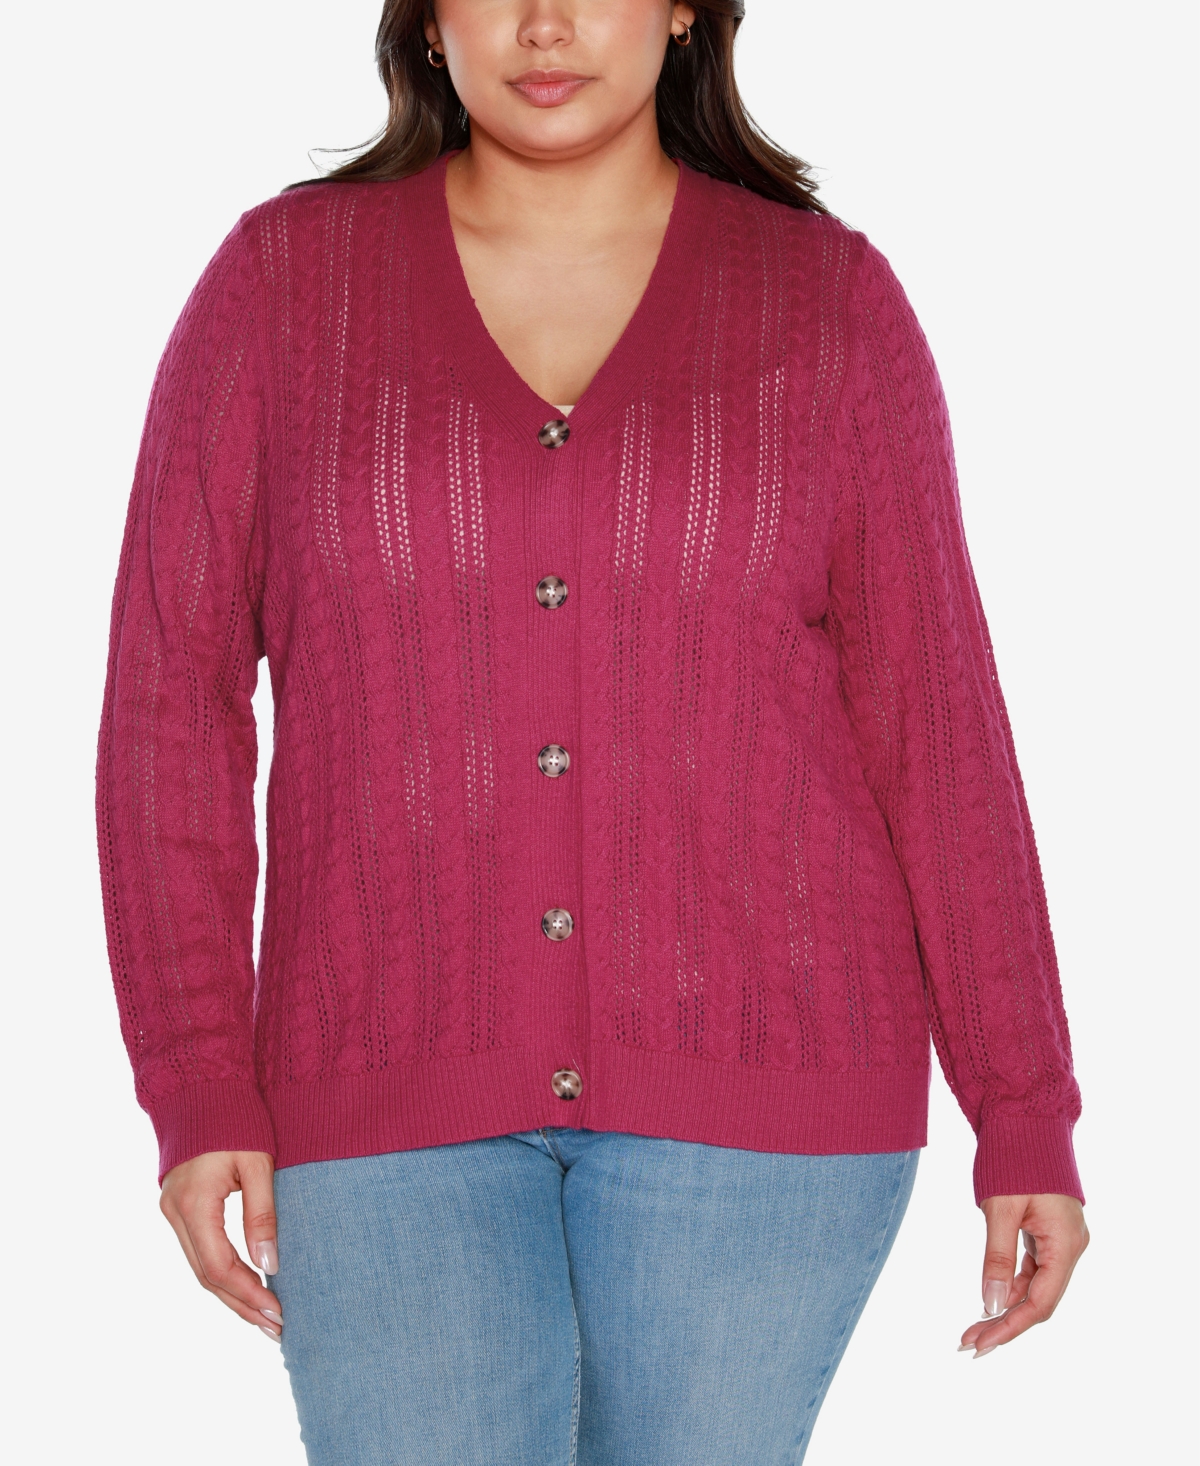 Belldini Black Label Plus Size Button-front Sweater Cardigan In Raspberry Beret